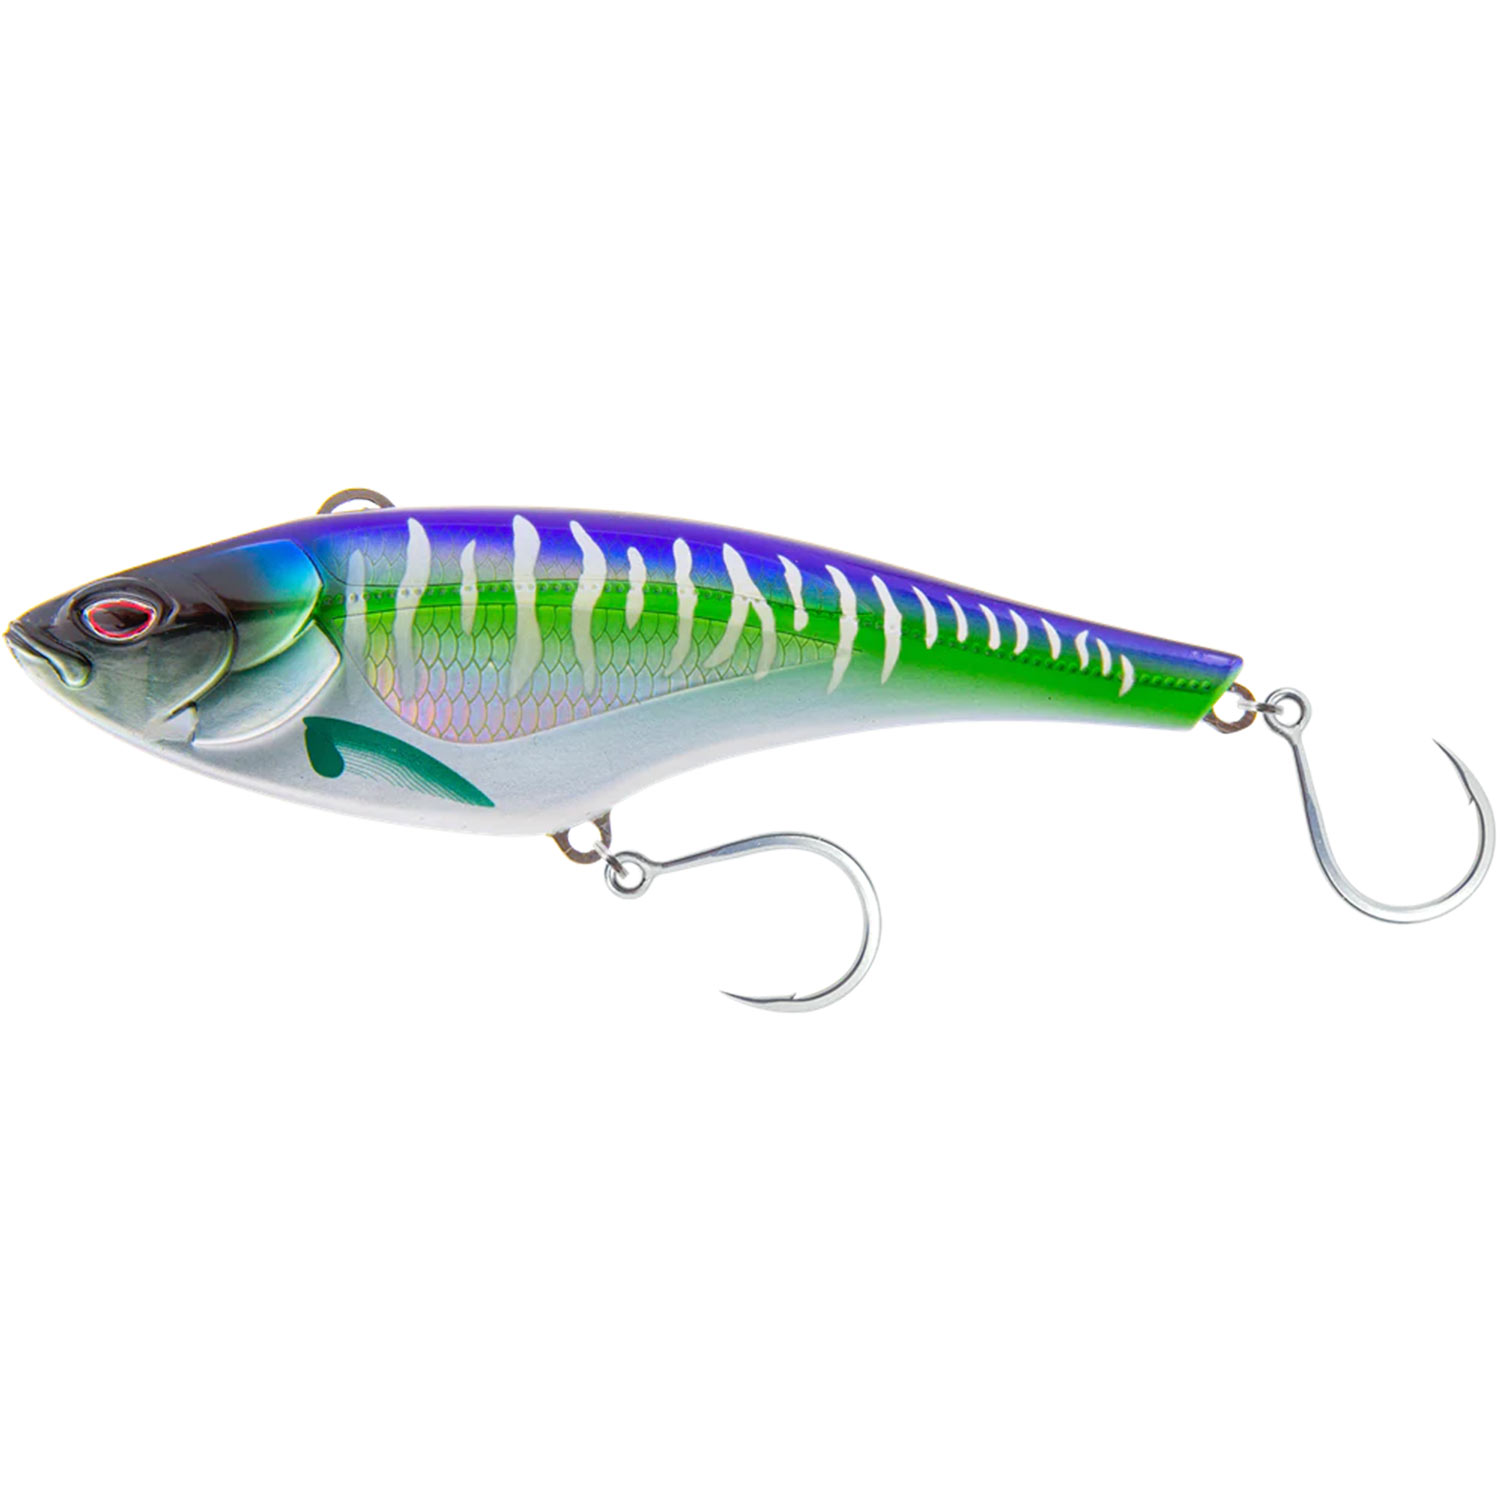 NOMAD DESIGN 8 Madmacs 200 Sinking High Speed Trolling Lure, 11 1